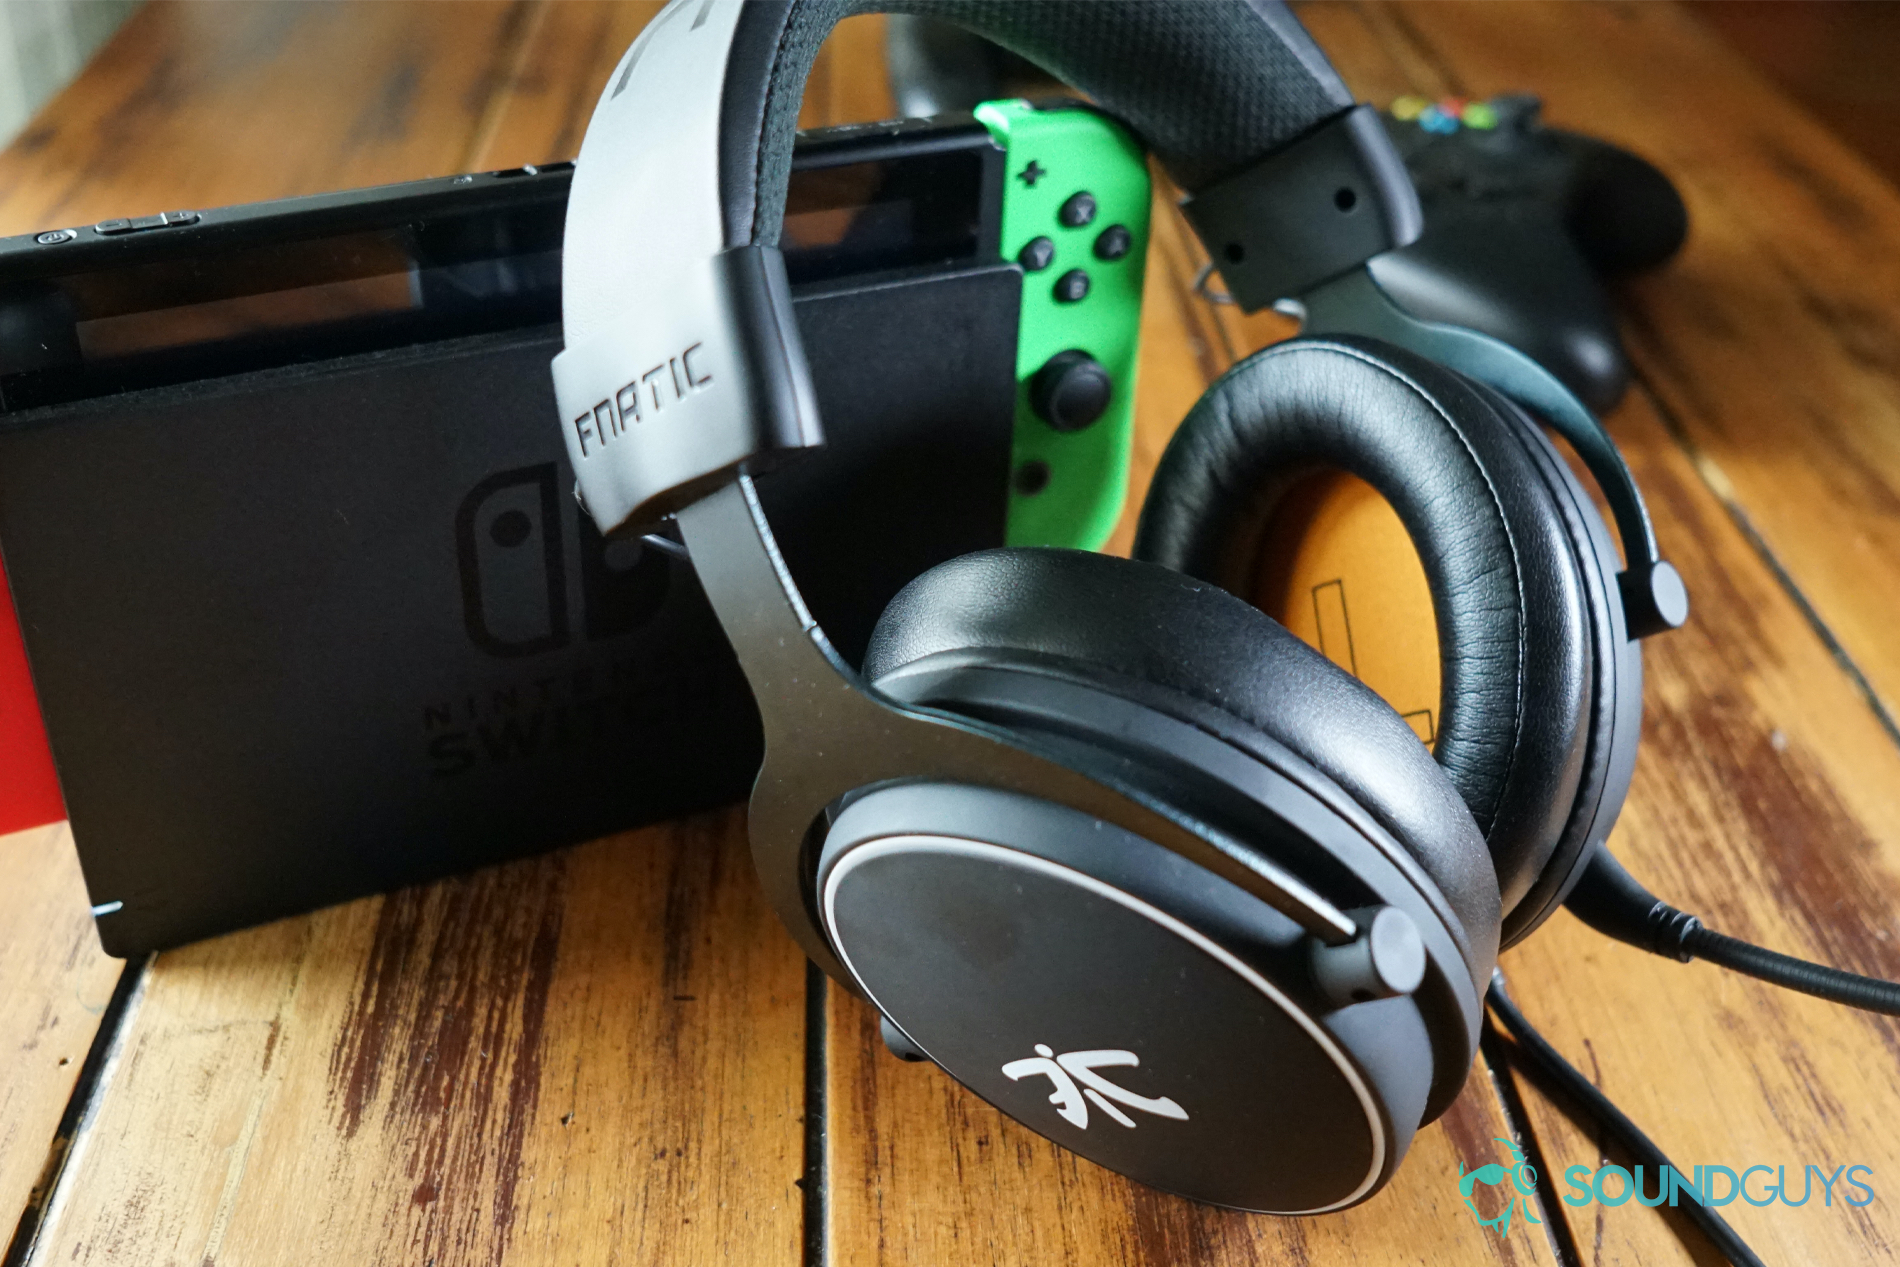 The fnatic react headset sits on a wooden table, leaning on a docked Nintendo Switch, in front of an Xbox One controller